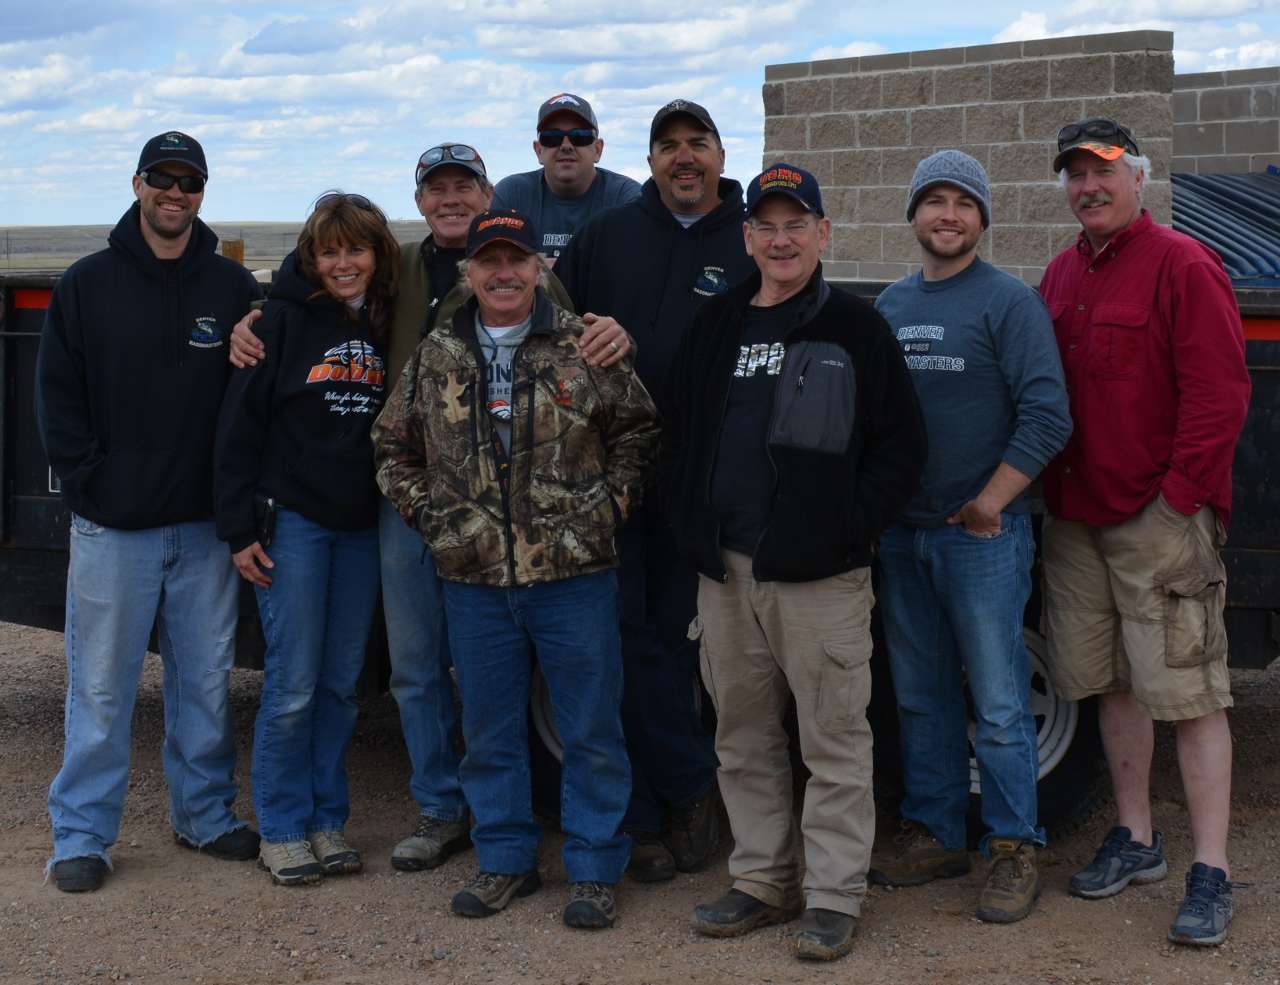 Members of the Aurora Bassmasters worked together to drop 10 large fish attractors into Aurora Reservoir in early April.